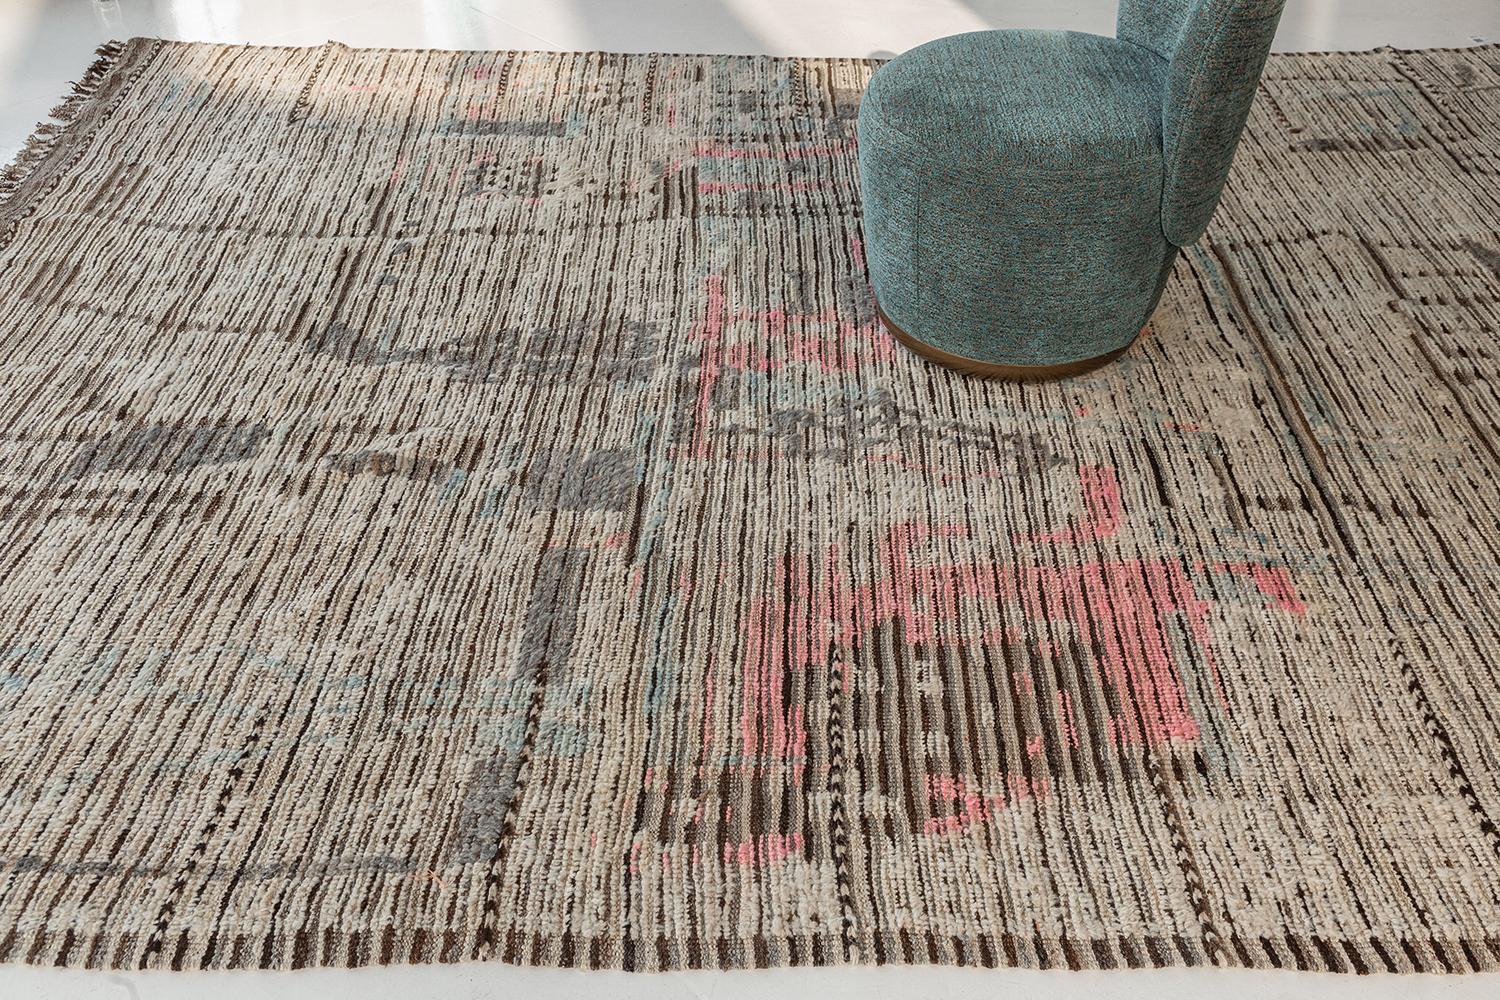 Meliska is a captivating textured rug with irregular motifs inspired by the Atlas Mountains of Morocco. Earthy tones of ivory, rose, and chocolate brown surrounded by umber brown shag work cohesively to make for a great contemporary interpretation